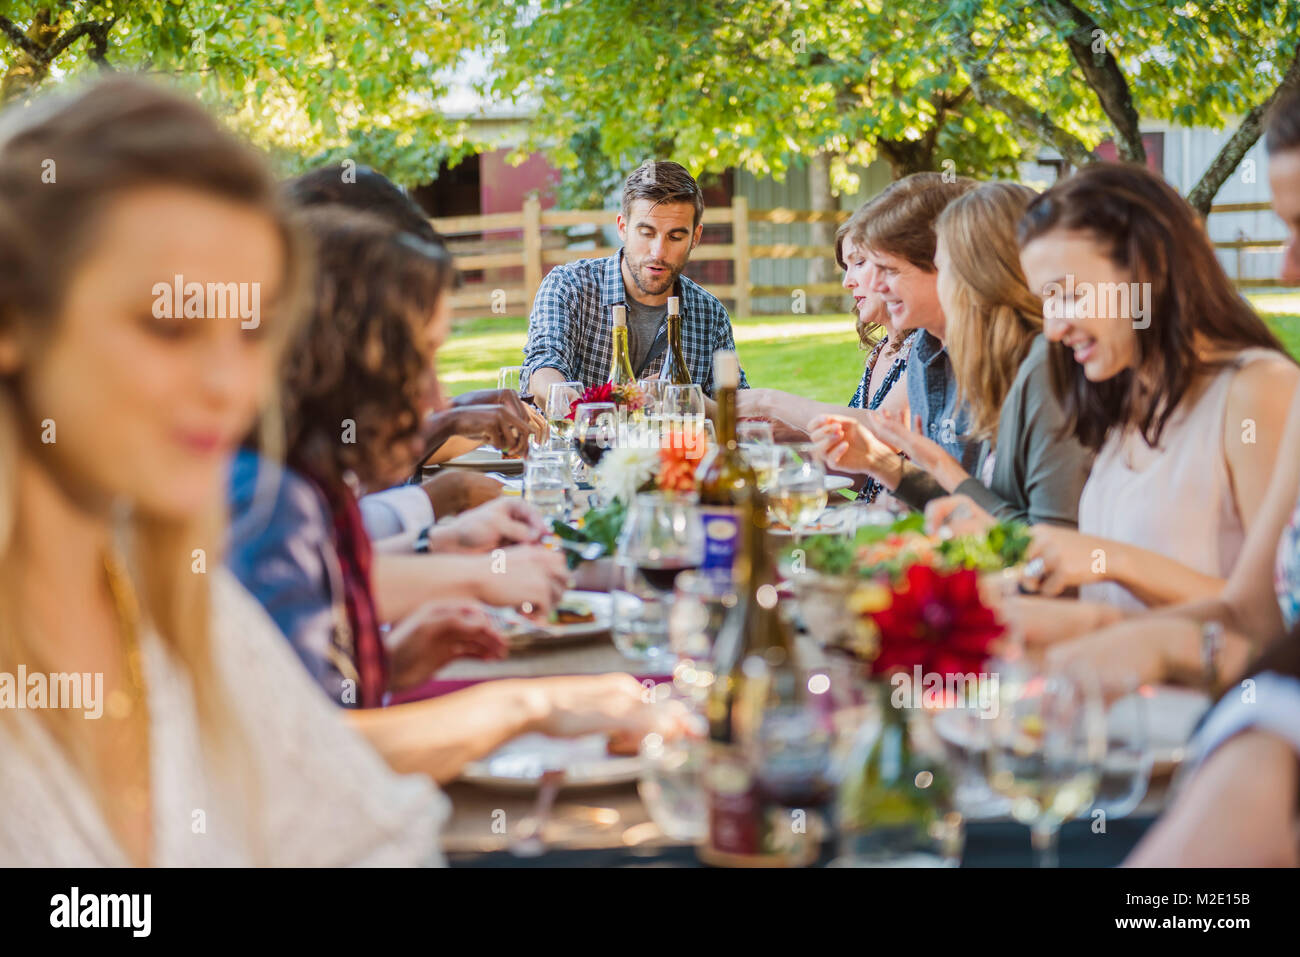 Friends enjoying wine at party outdoors Stock Photo